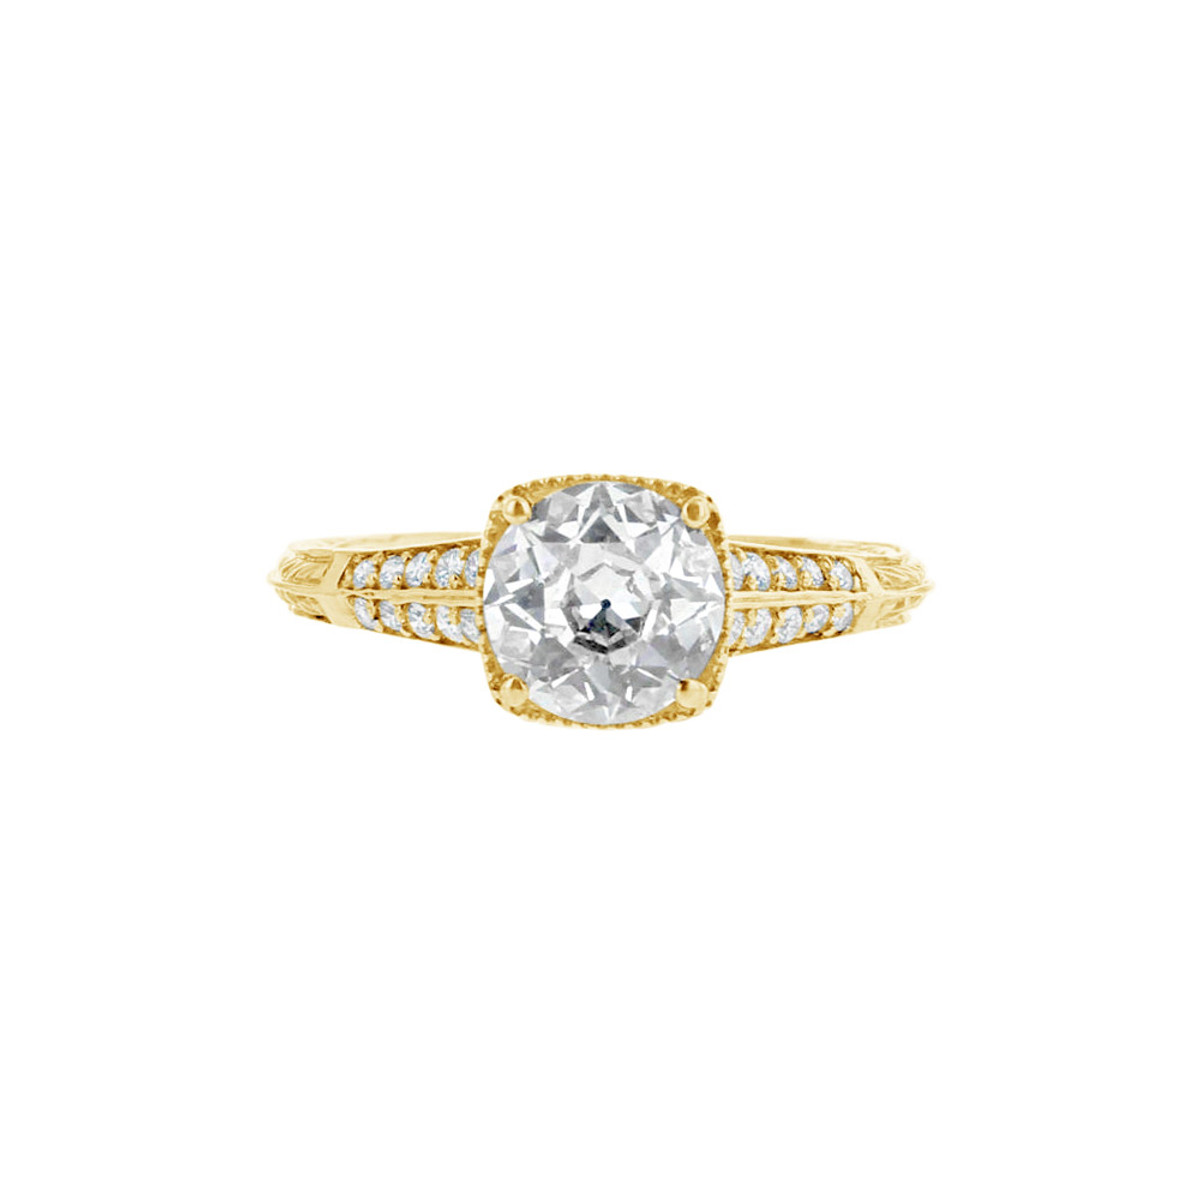 Engage By Hyde Park 18KT Yellow Gold & 1.54CT GIA Diamond Vintage Solitaire Engagement Ring Product Image